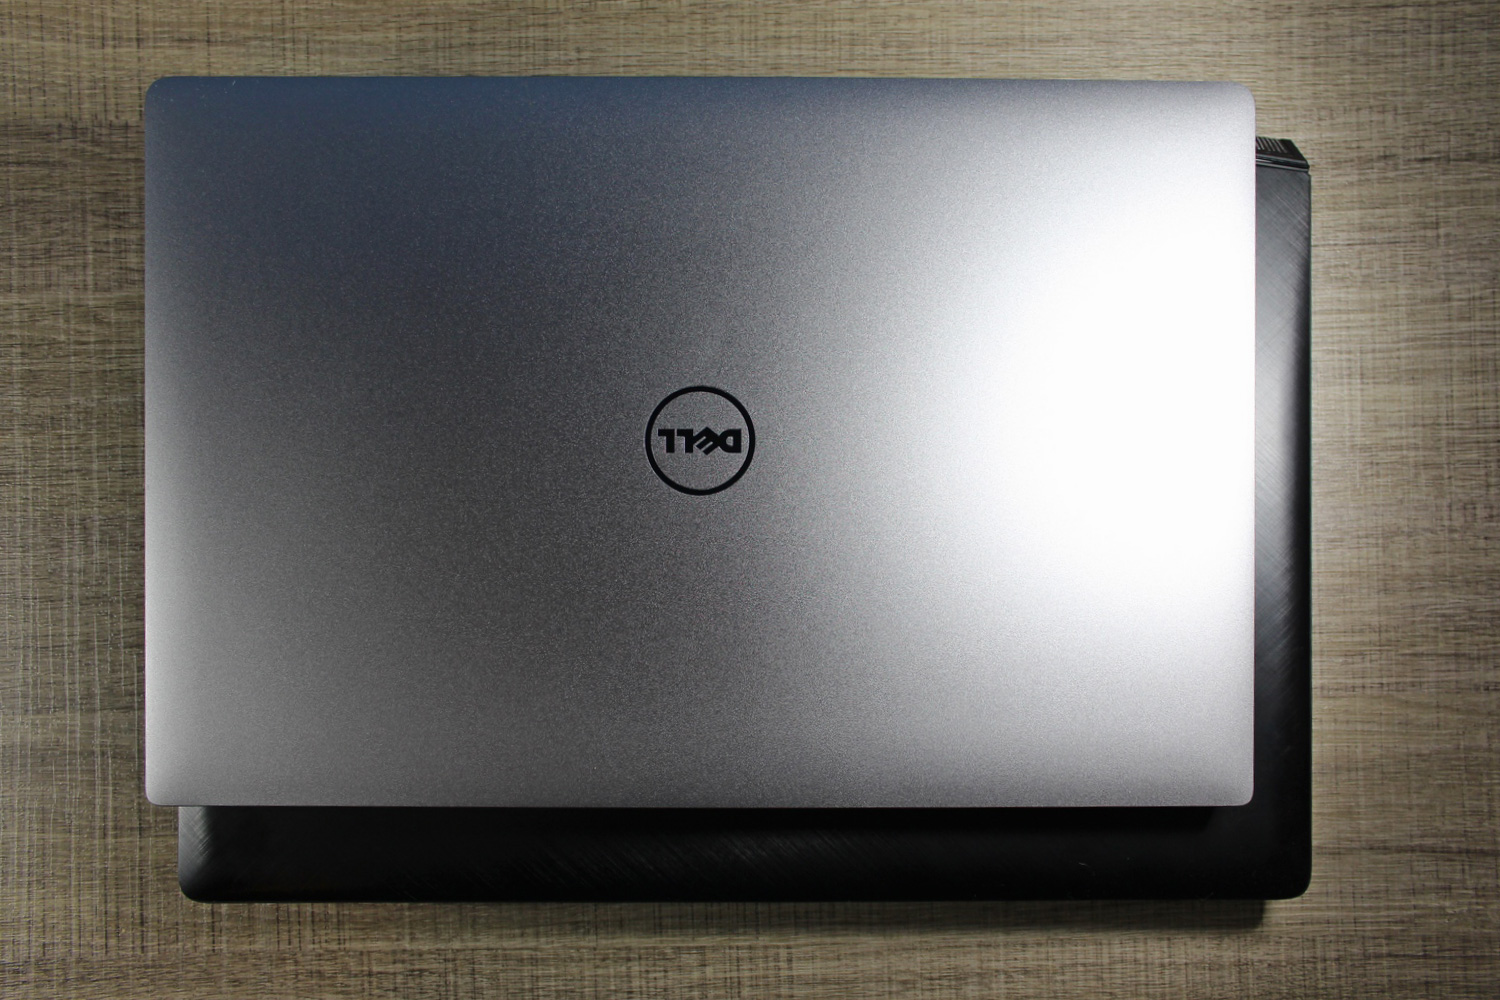 Final Words The Dell Xps 15 9550 Review Infinity Edge Lineup Expands